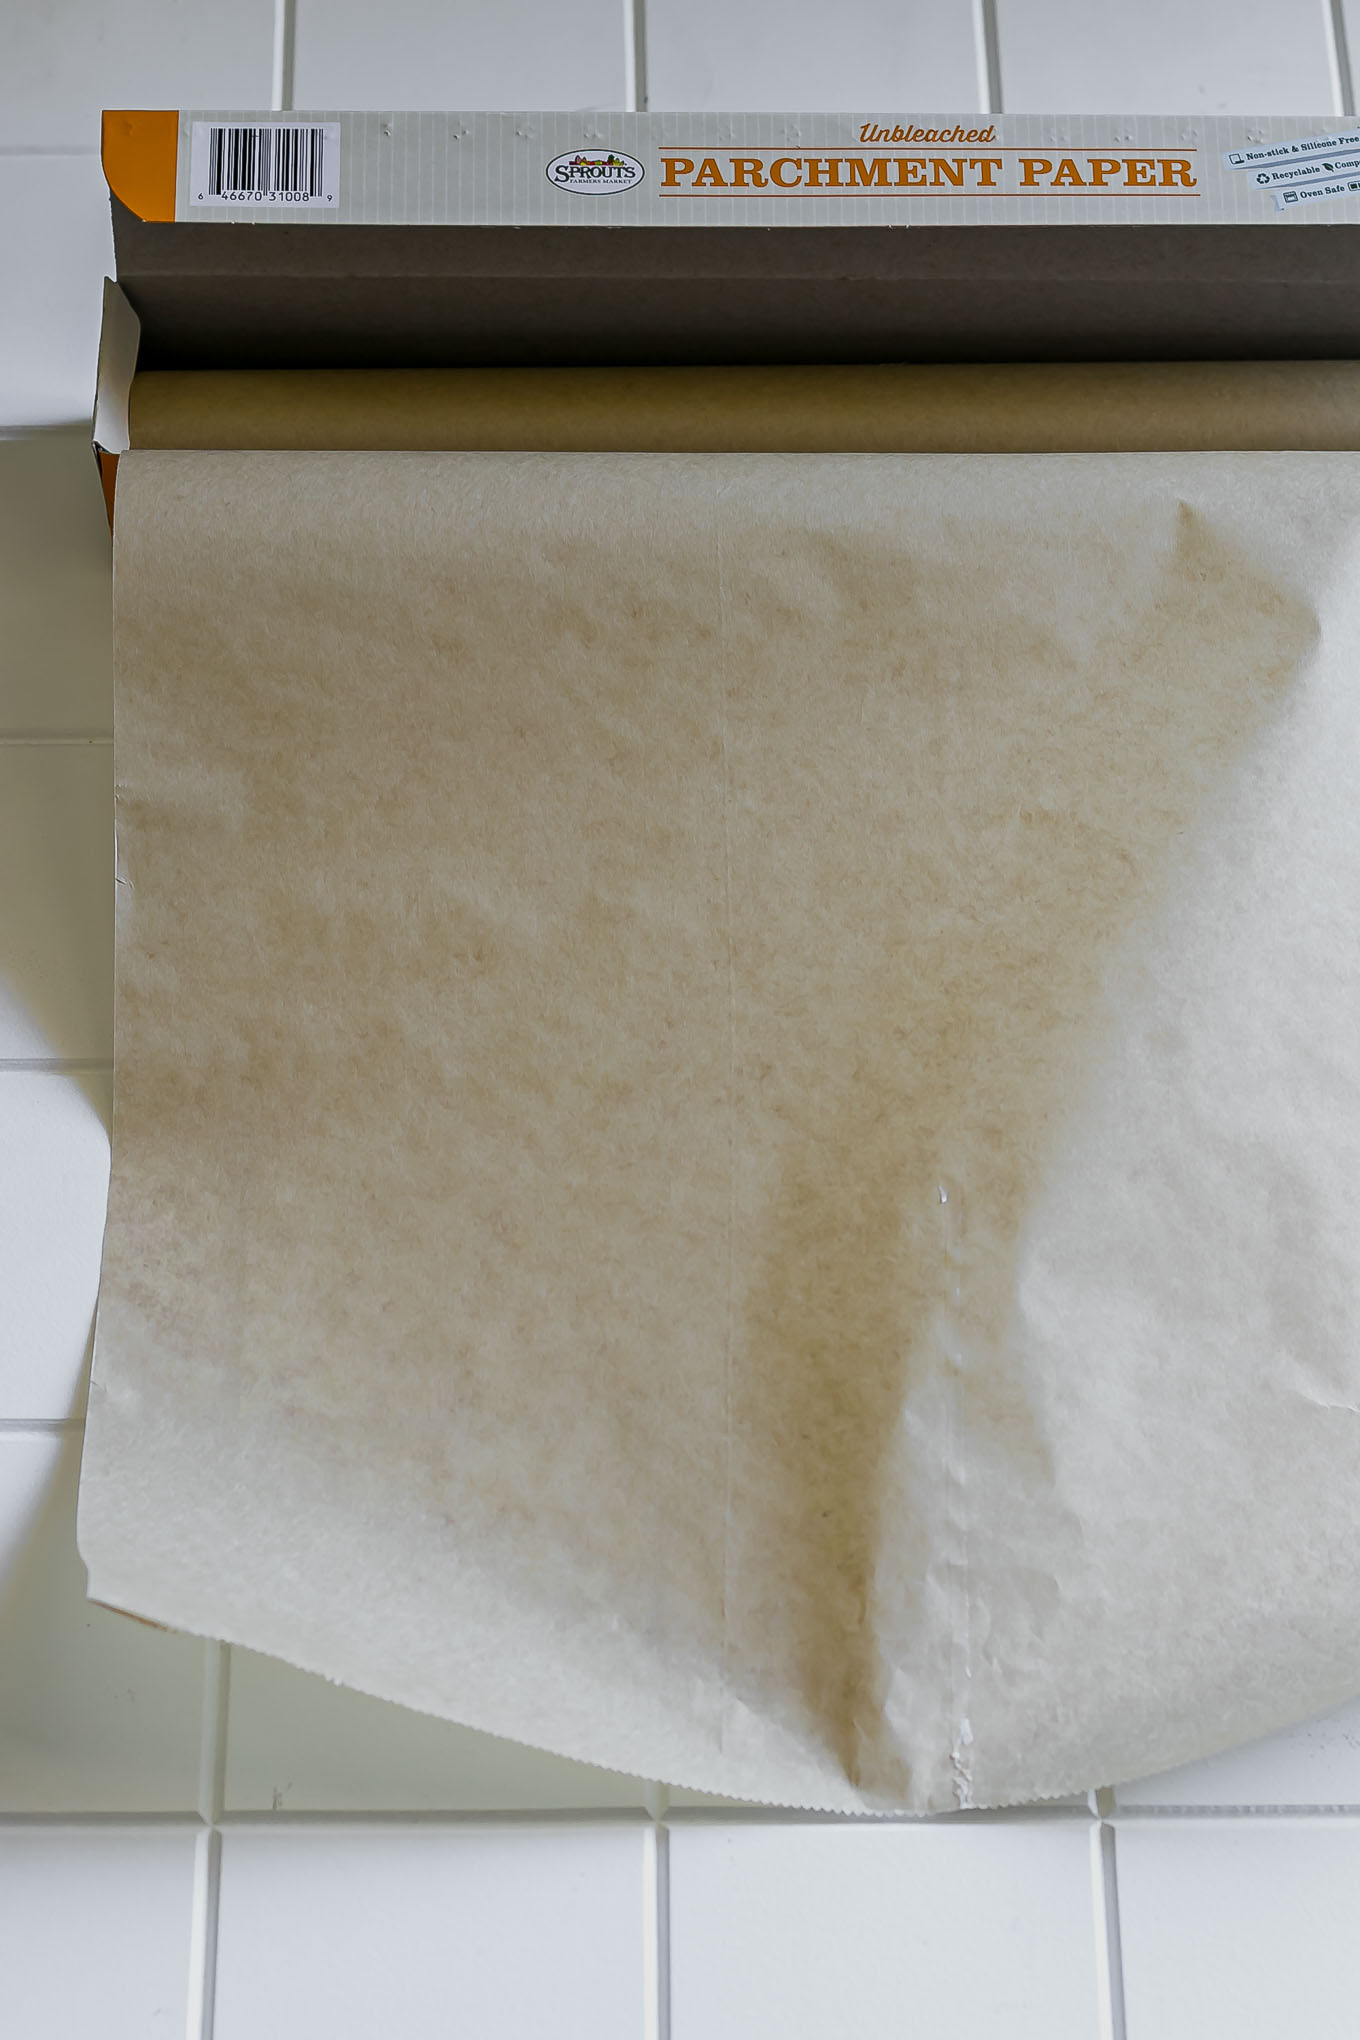 a roll of brown unbleached parchment paper on a white table